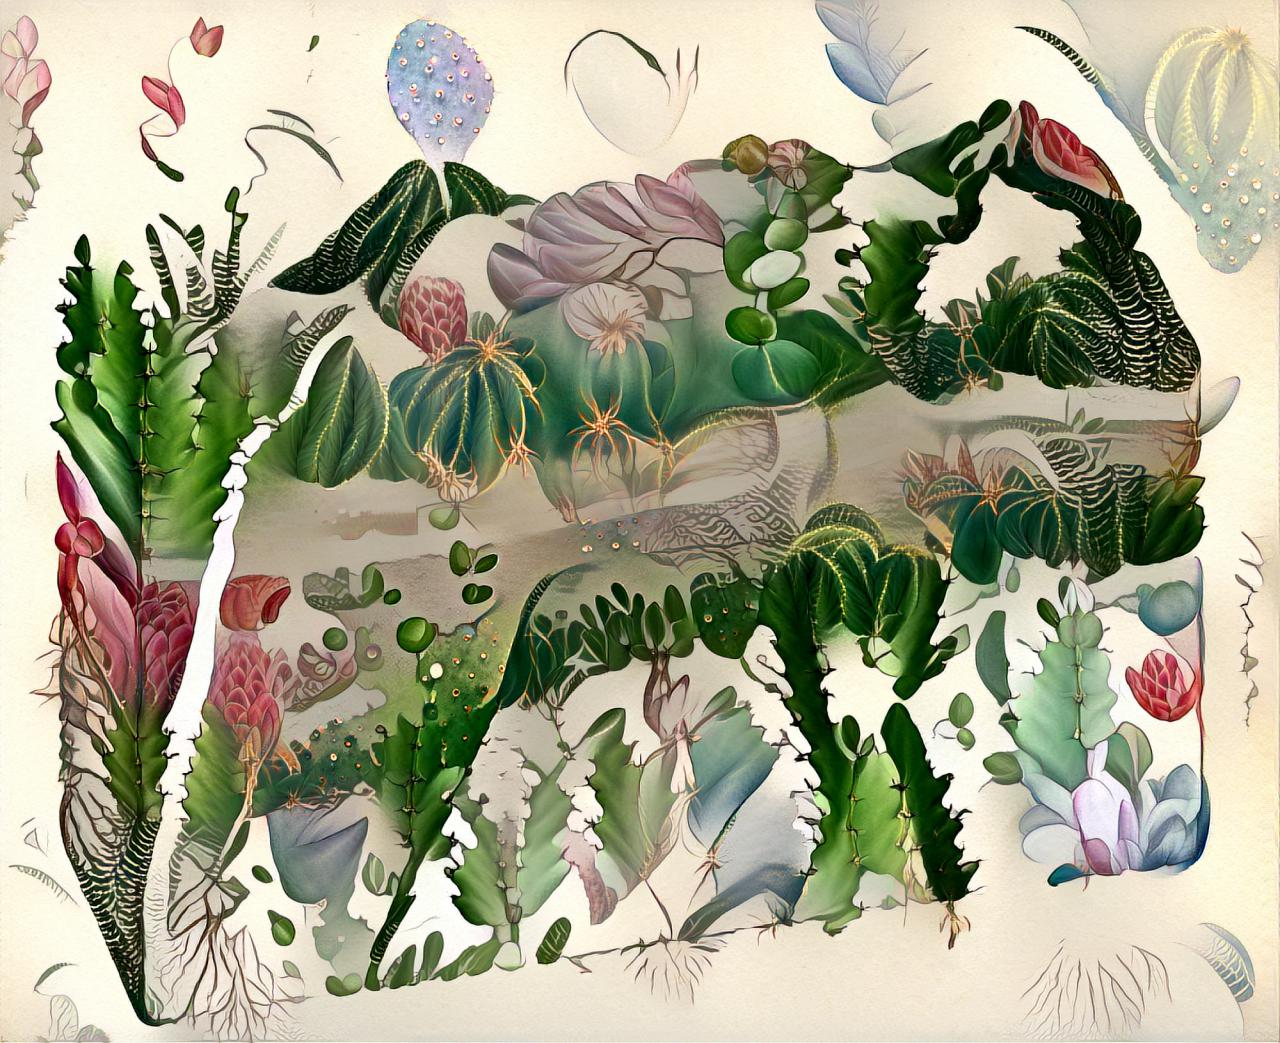 The drawing is animated by an algorithm that shows the cross-section of the ground, but instead of sediments a deep interlocking between animals and their environment.